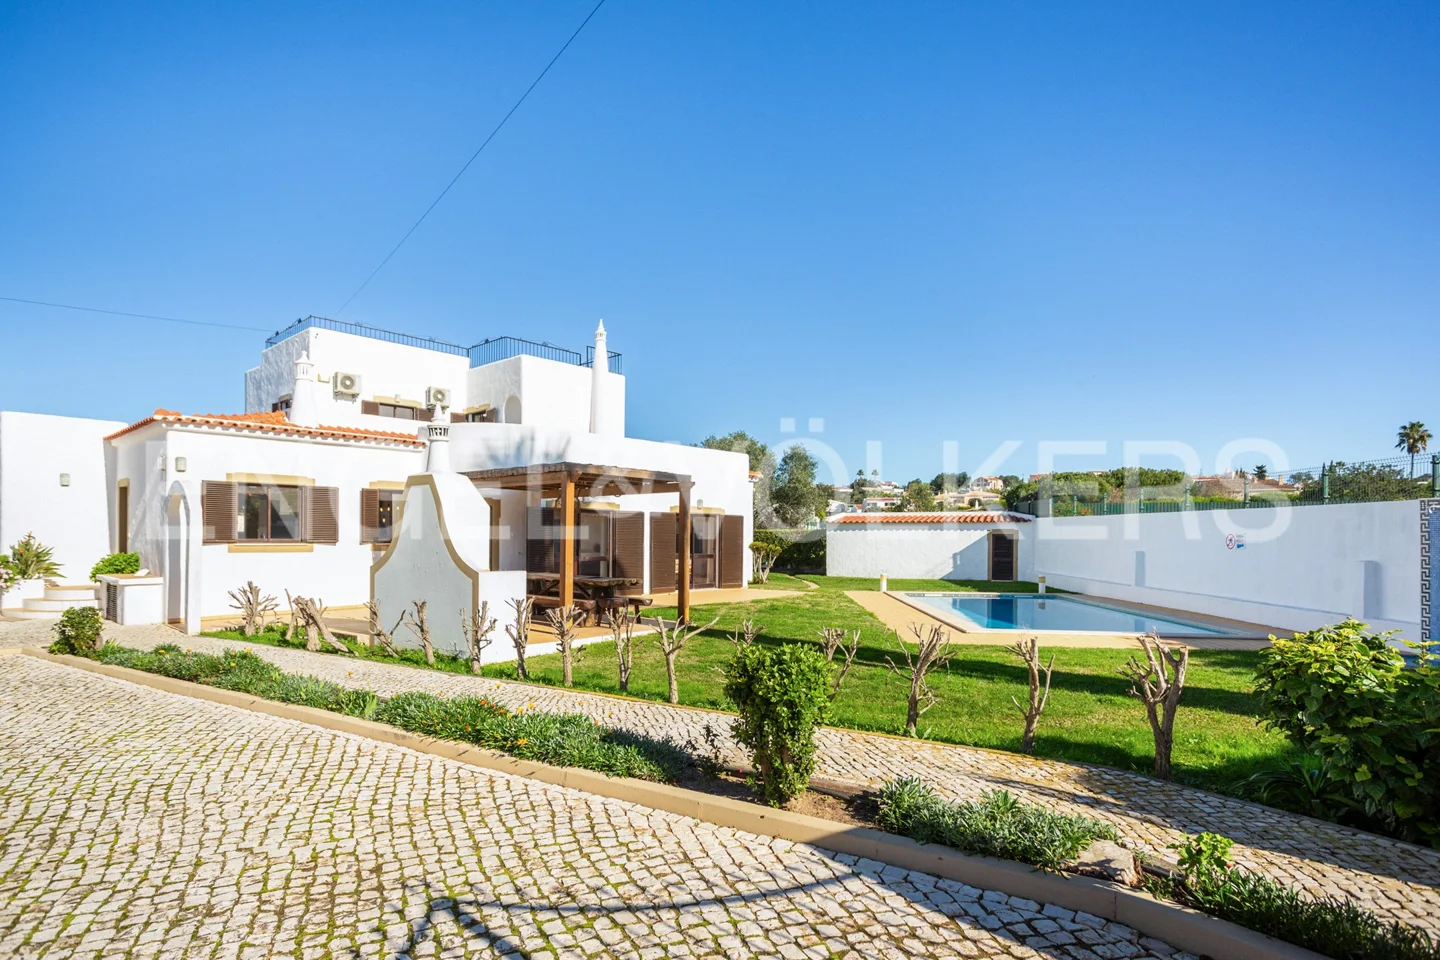 5-Bedroom Villa with garden and pool near Galé